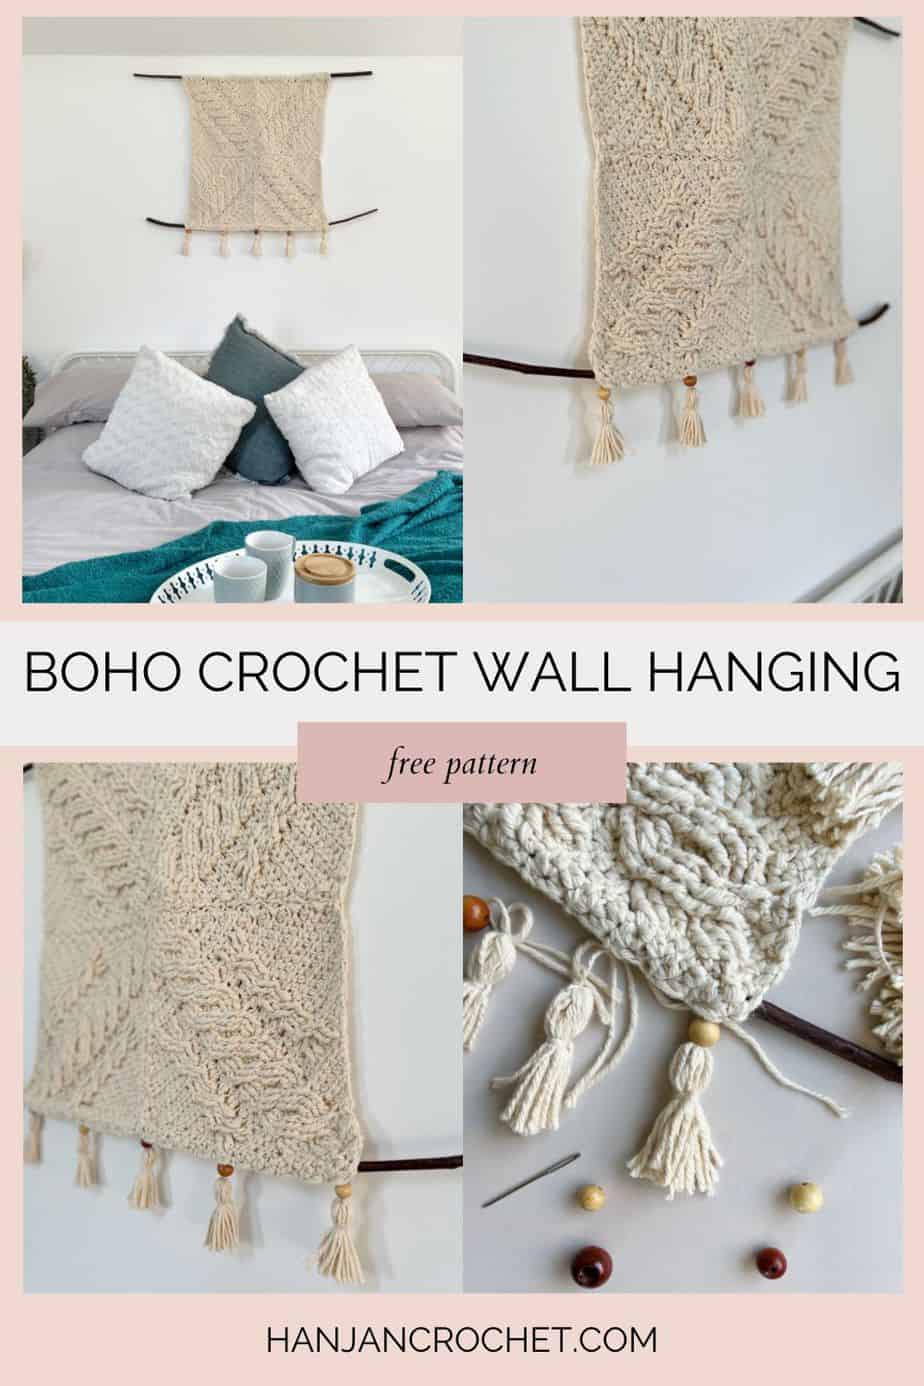 four images showing how to make a crochet wall hanging